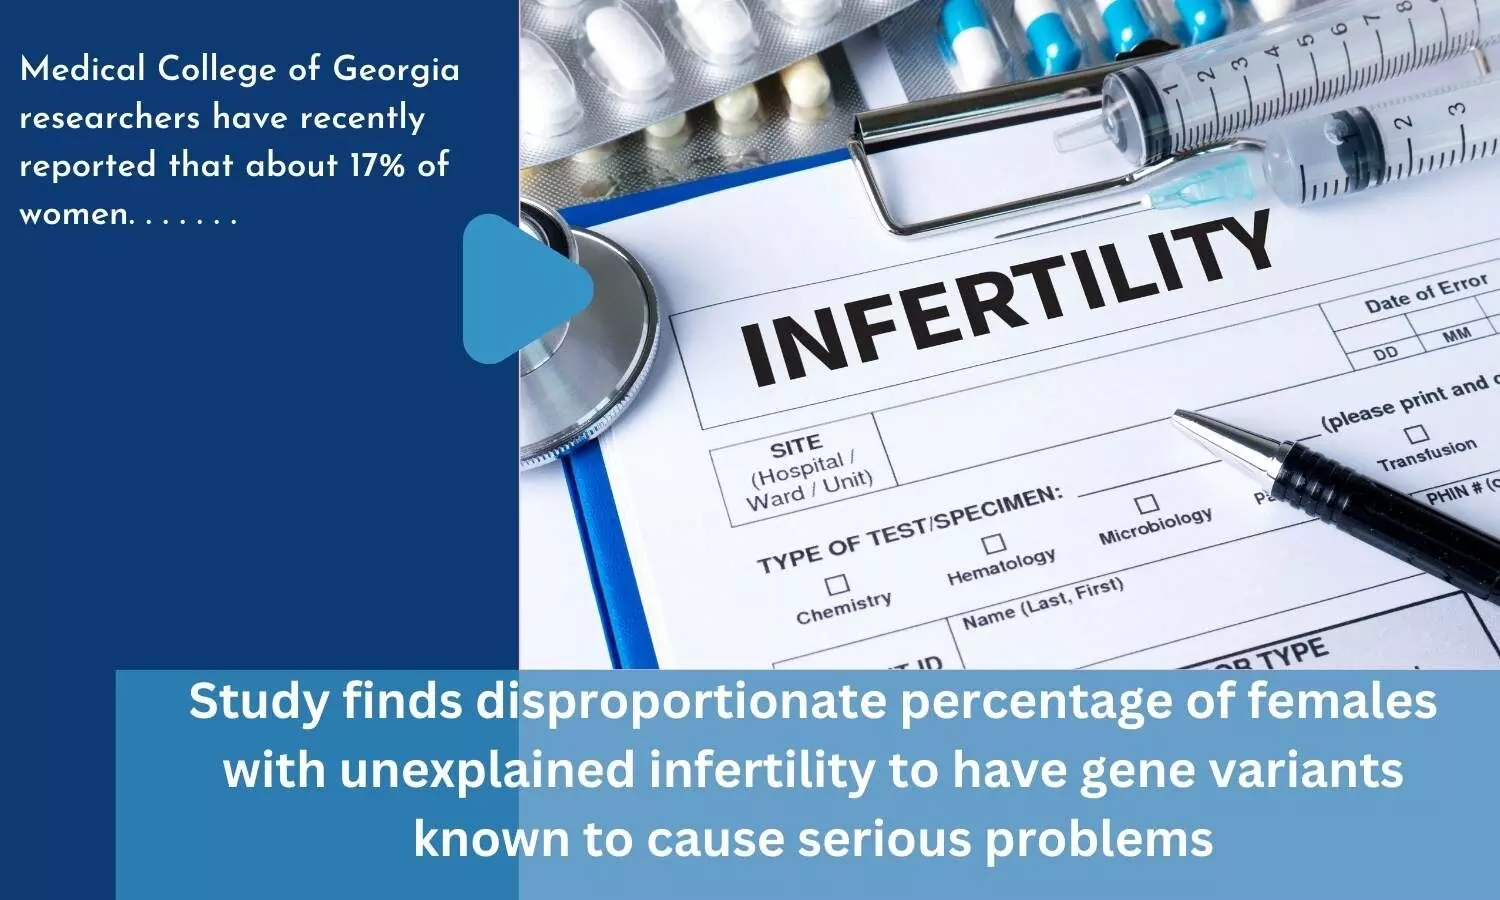 Study finds disproportionate percentage of females with unexplained infertility to have gene variants known to cause serious problems